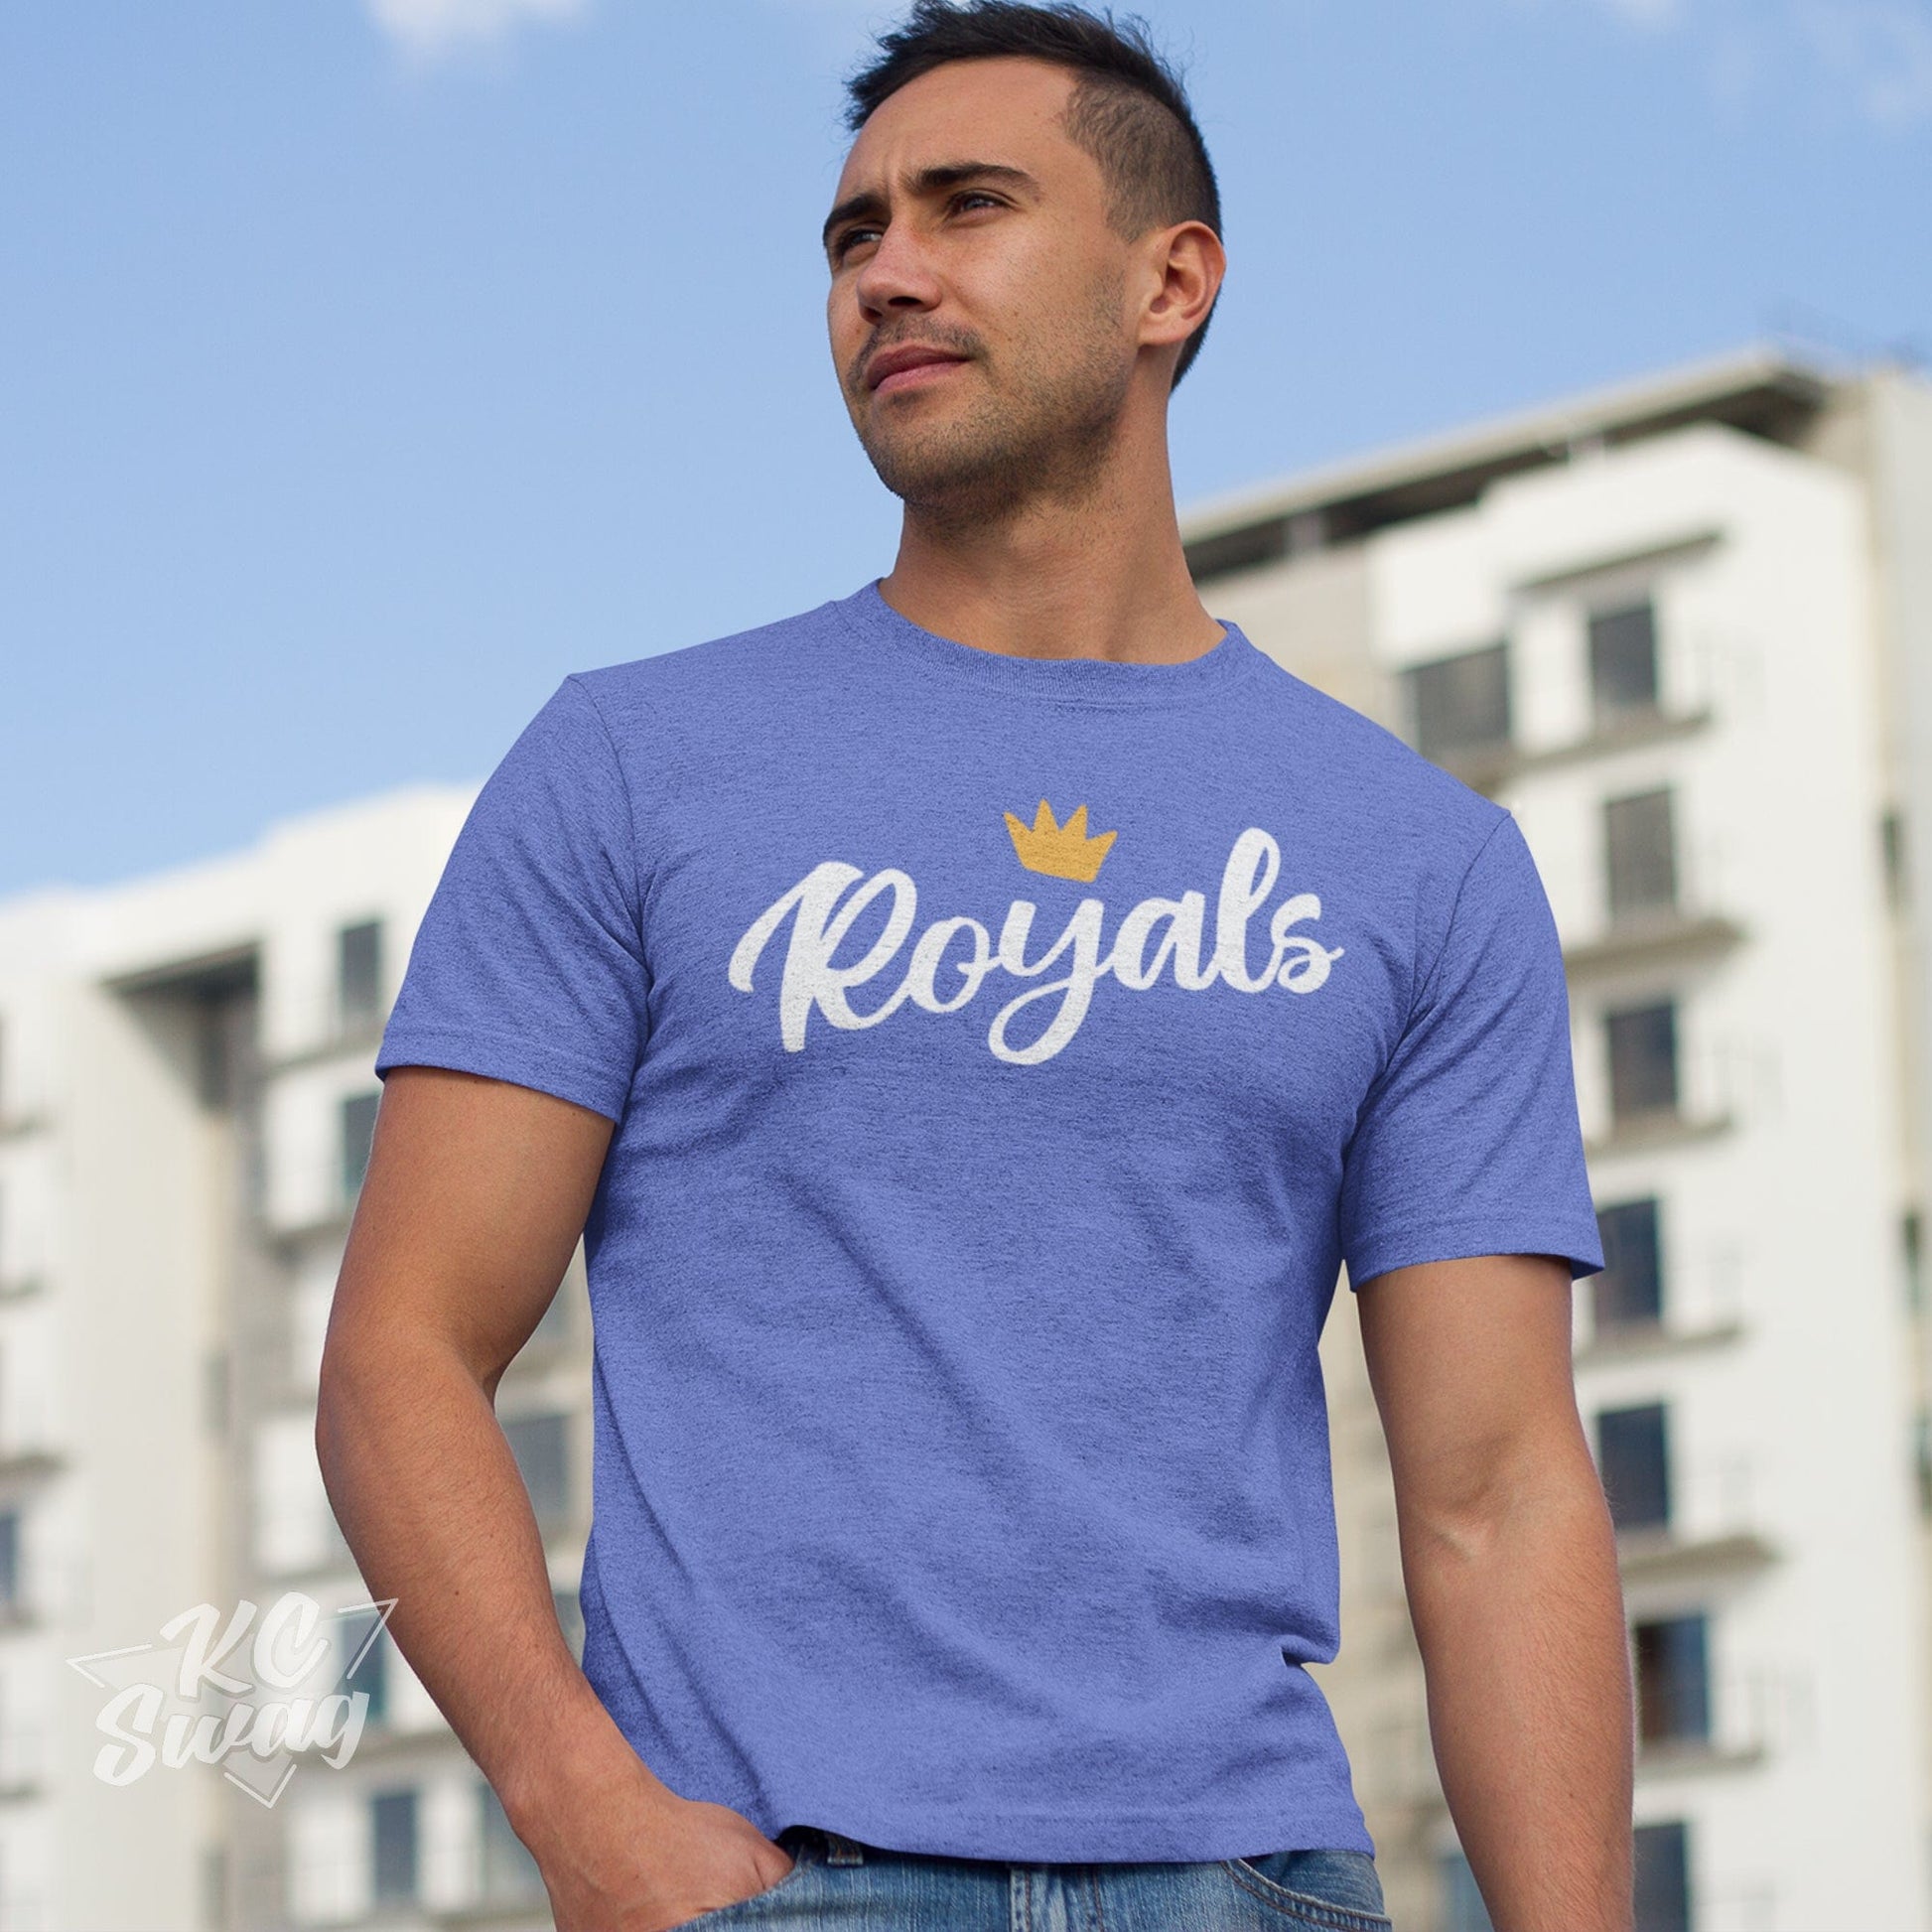 KC Swag Kansas City Royals ROYALS CROWN on heather Columbia blue unisex t-shirt worn by male model standing in front of apartment building